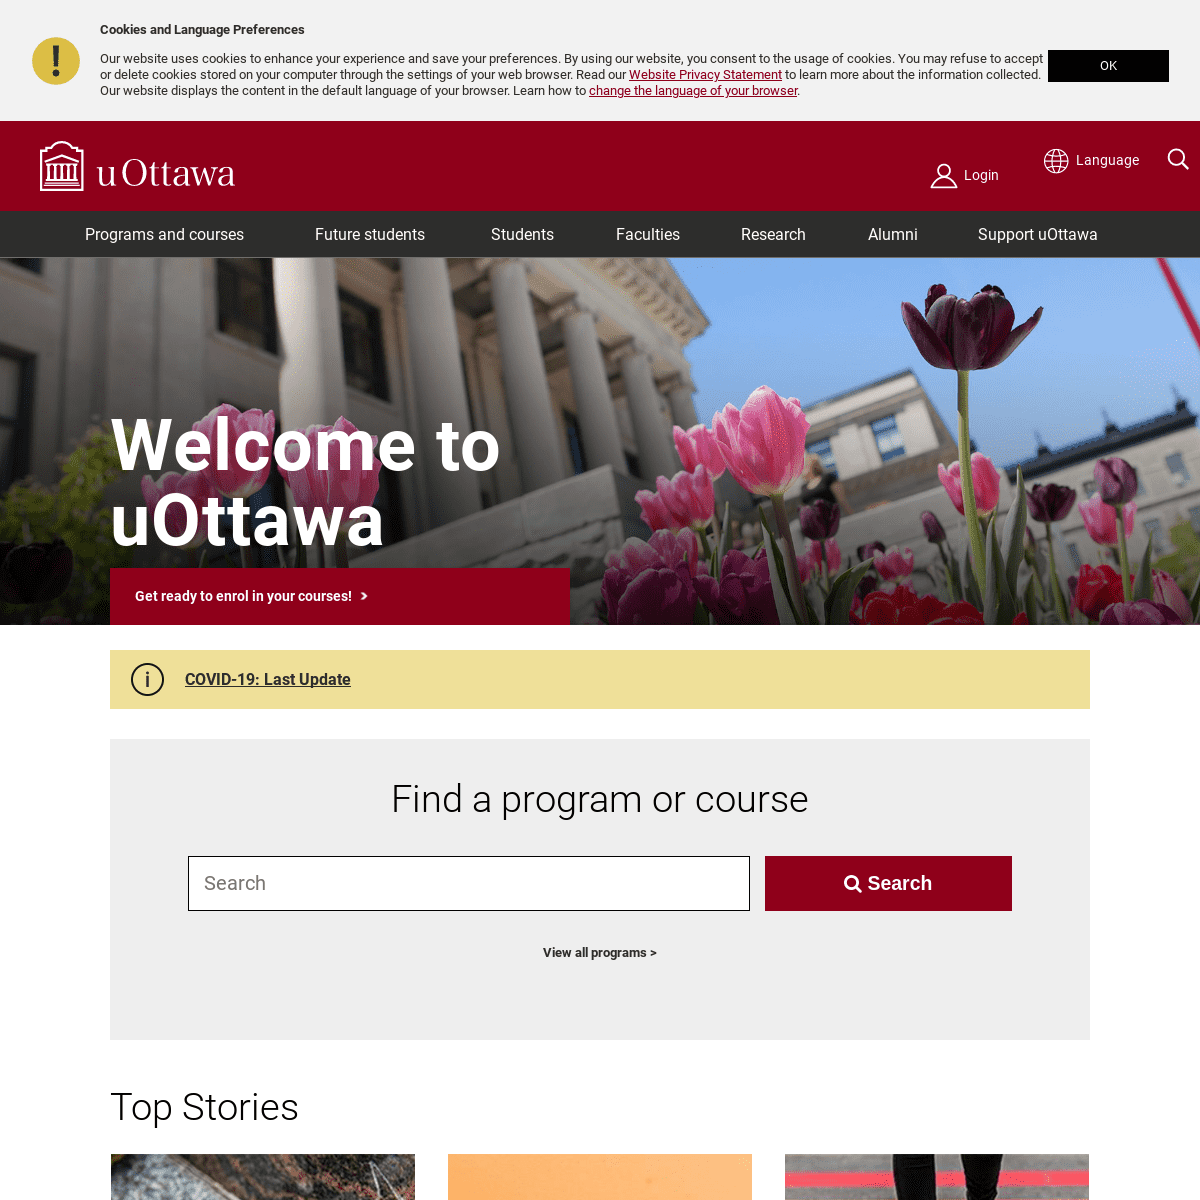 A complete backup of https://uottawa.ca